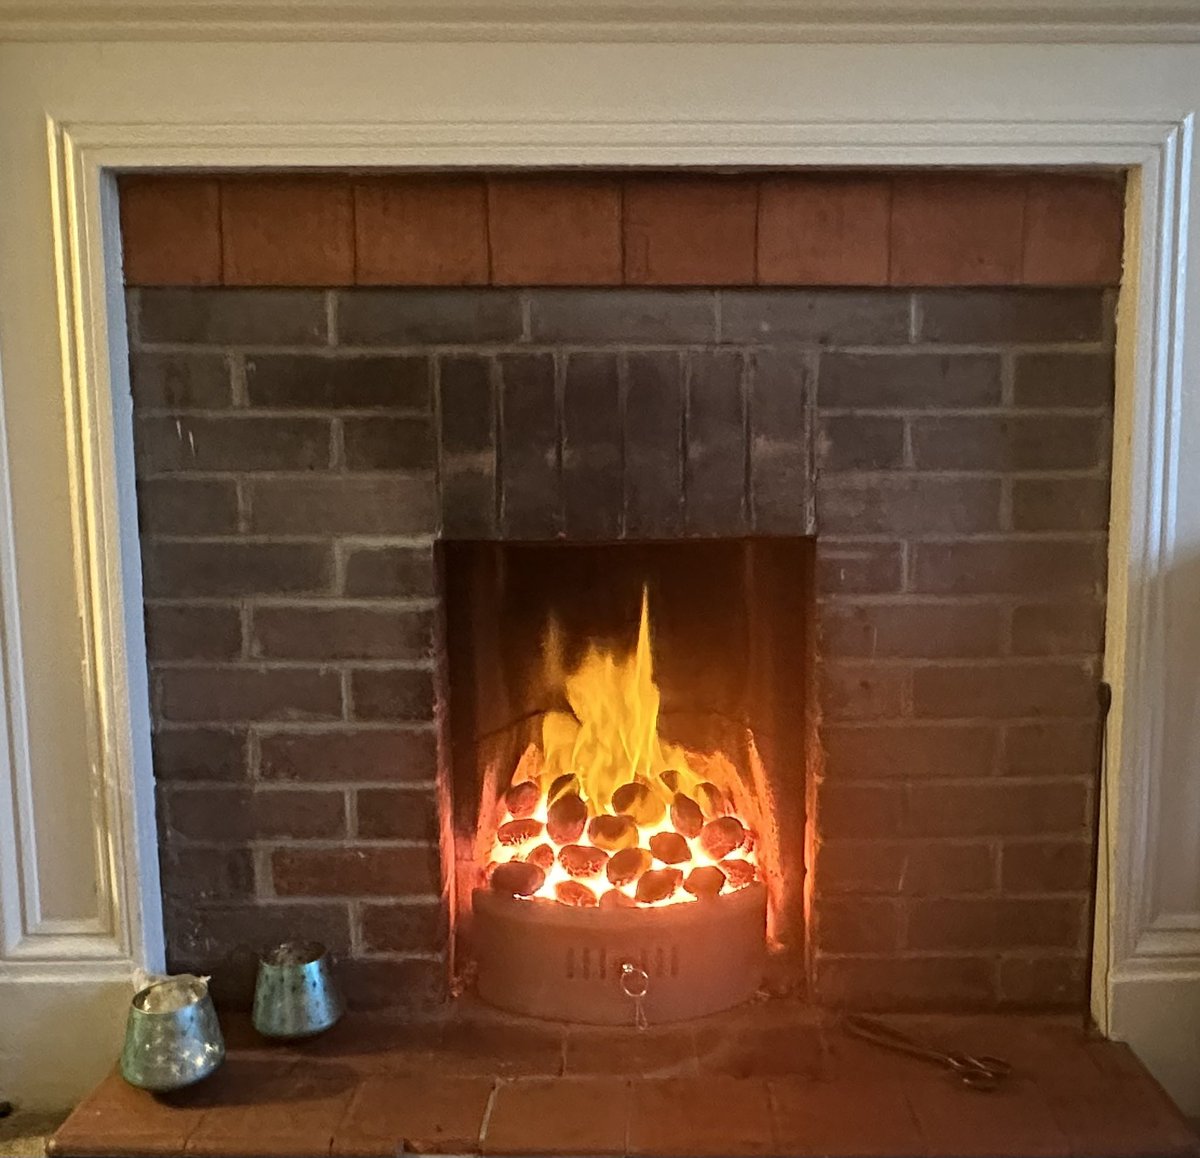 Day 390 of springtime in Norfolk. Birdsong (probably - too cold to check), flowers (suppose - didn’t fancy hypothermia to look), roaring fires and way too much thermal clothing.  One day it will be warm I’ve heard - but find it hard to believe.